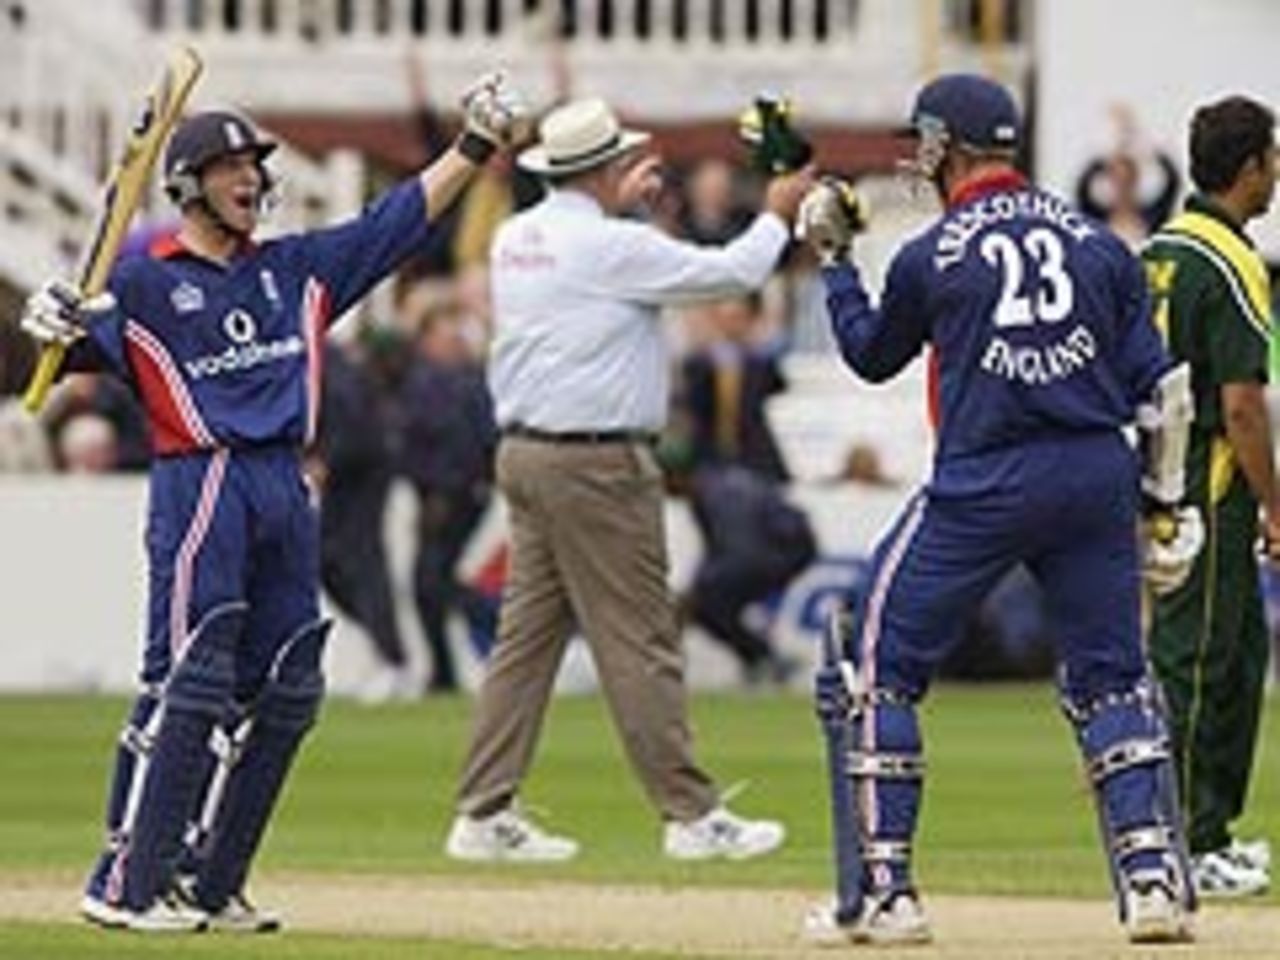 Marcus Trecothick and Chris Read celebrate the winning runs, England v Pakistan, June 22, 2003